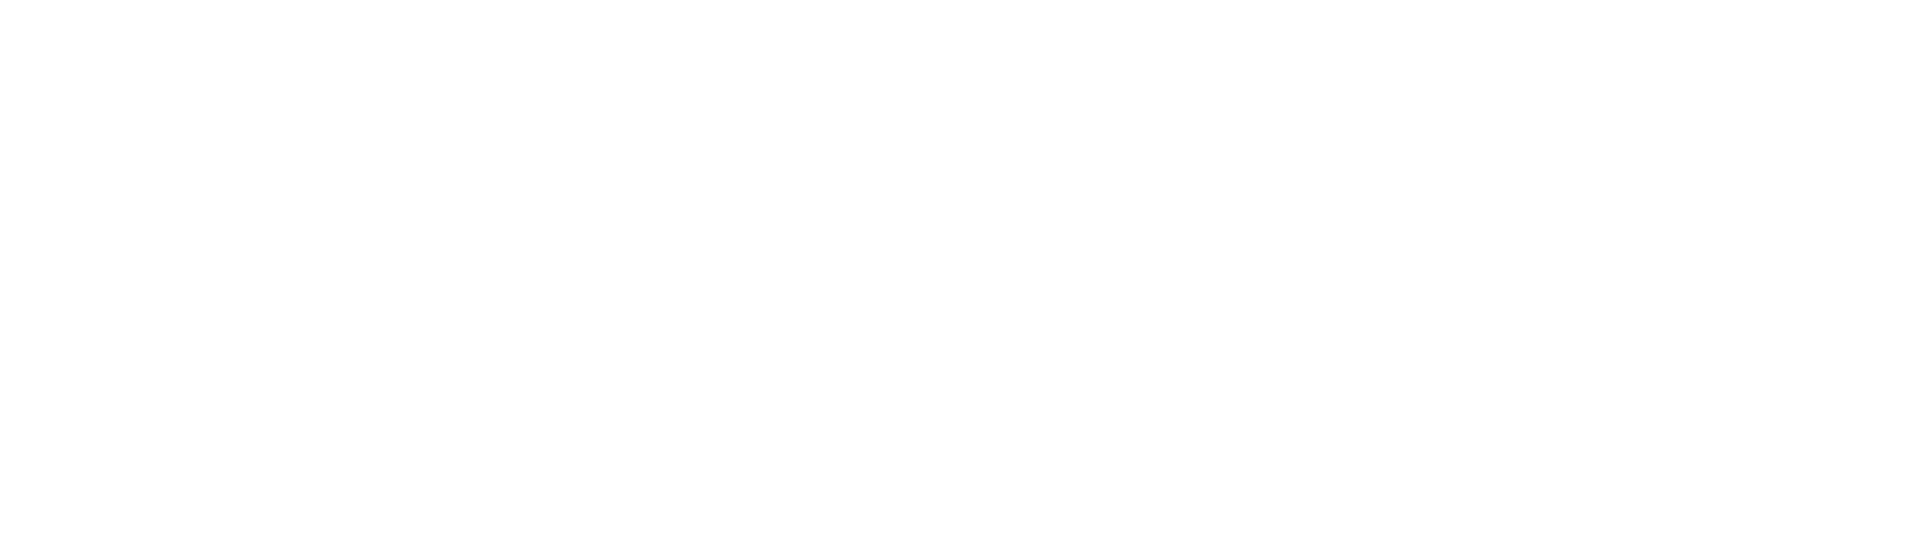 wiksig_logo_poziome_biale.png